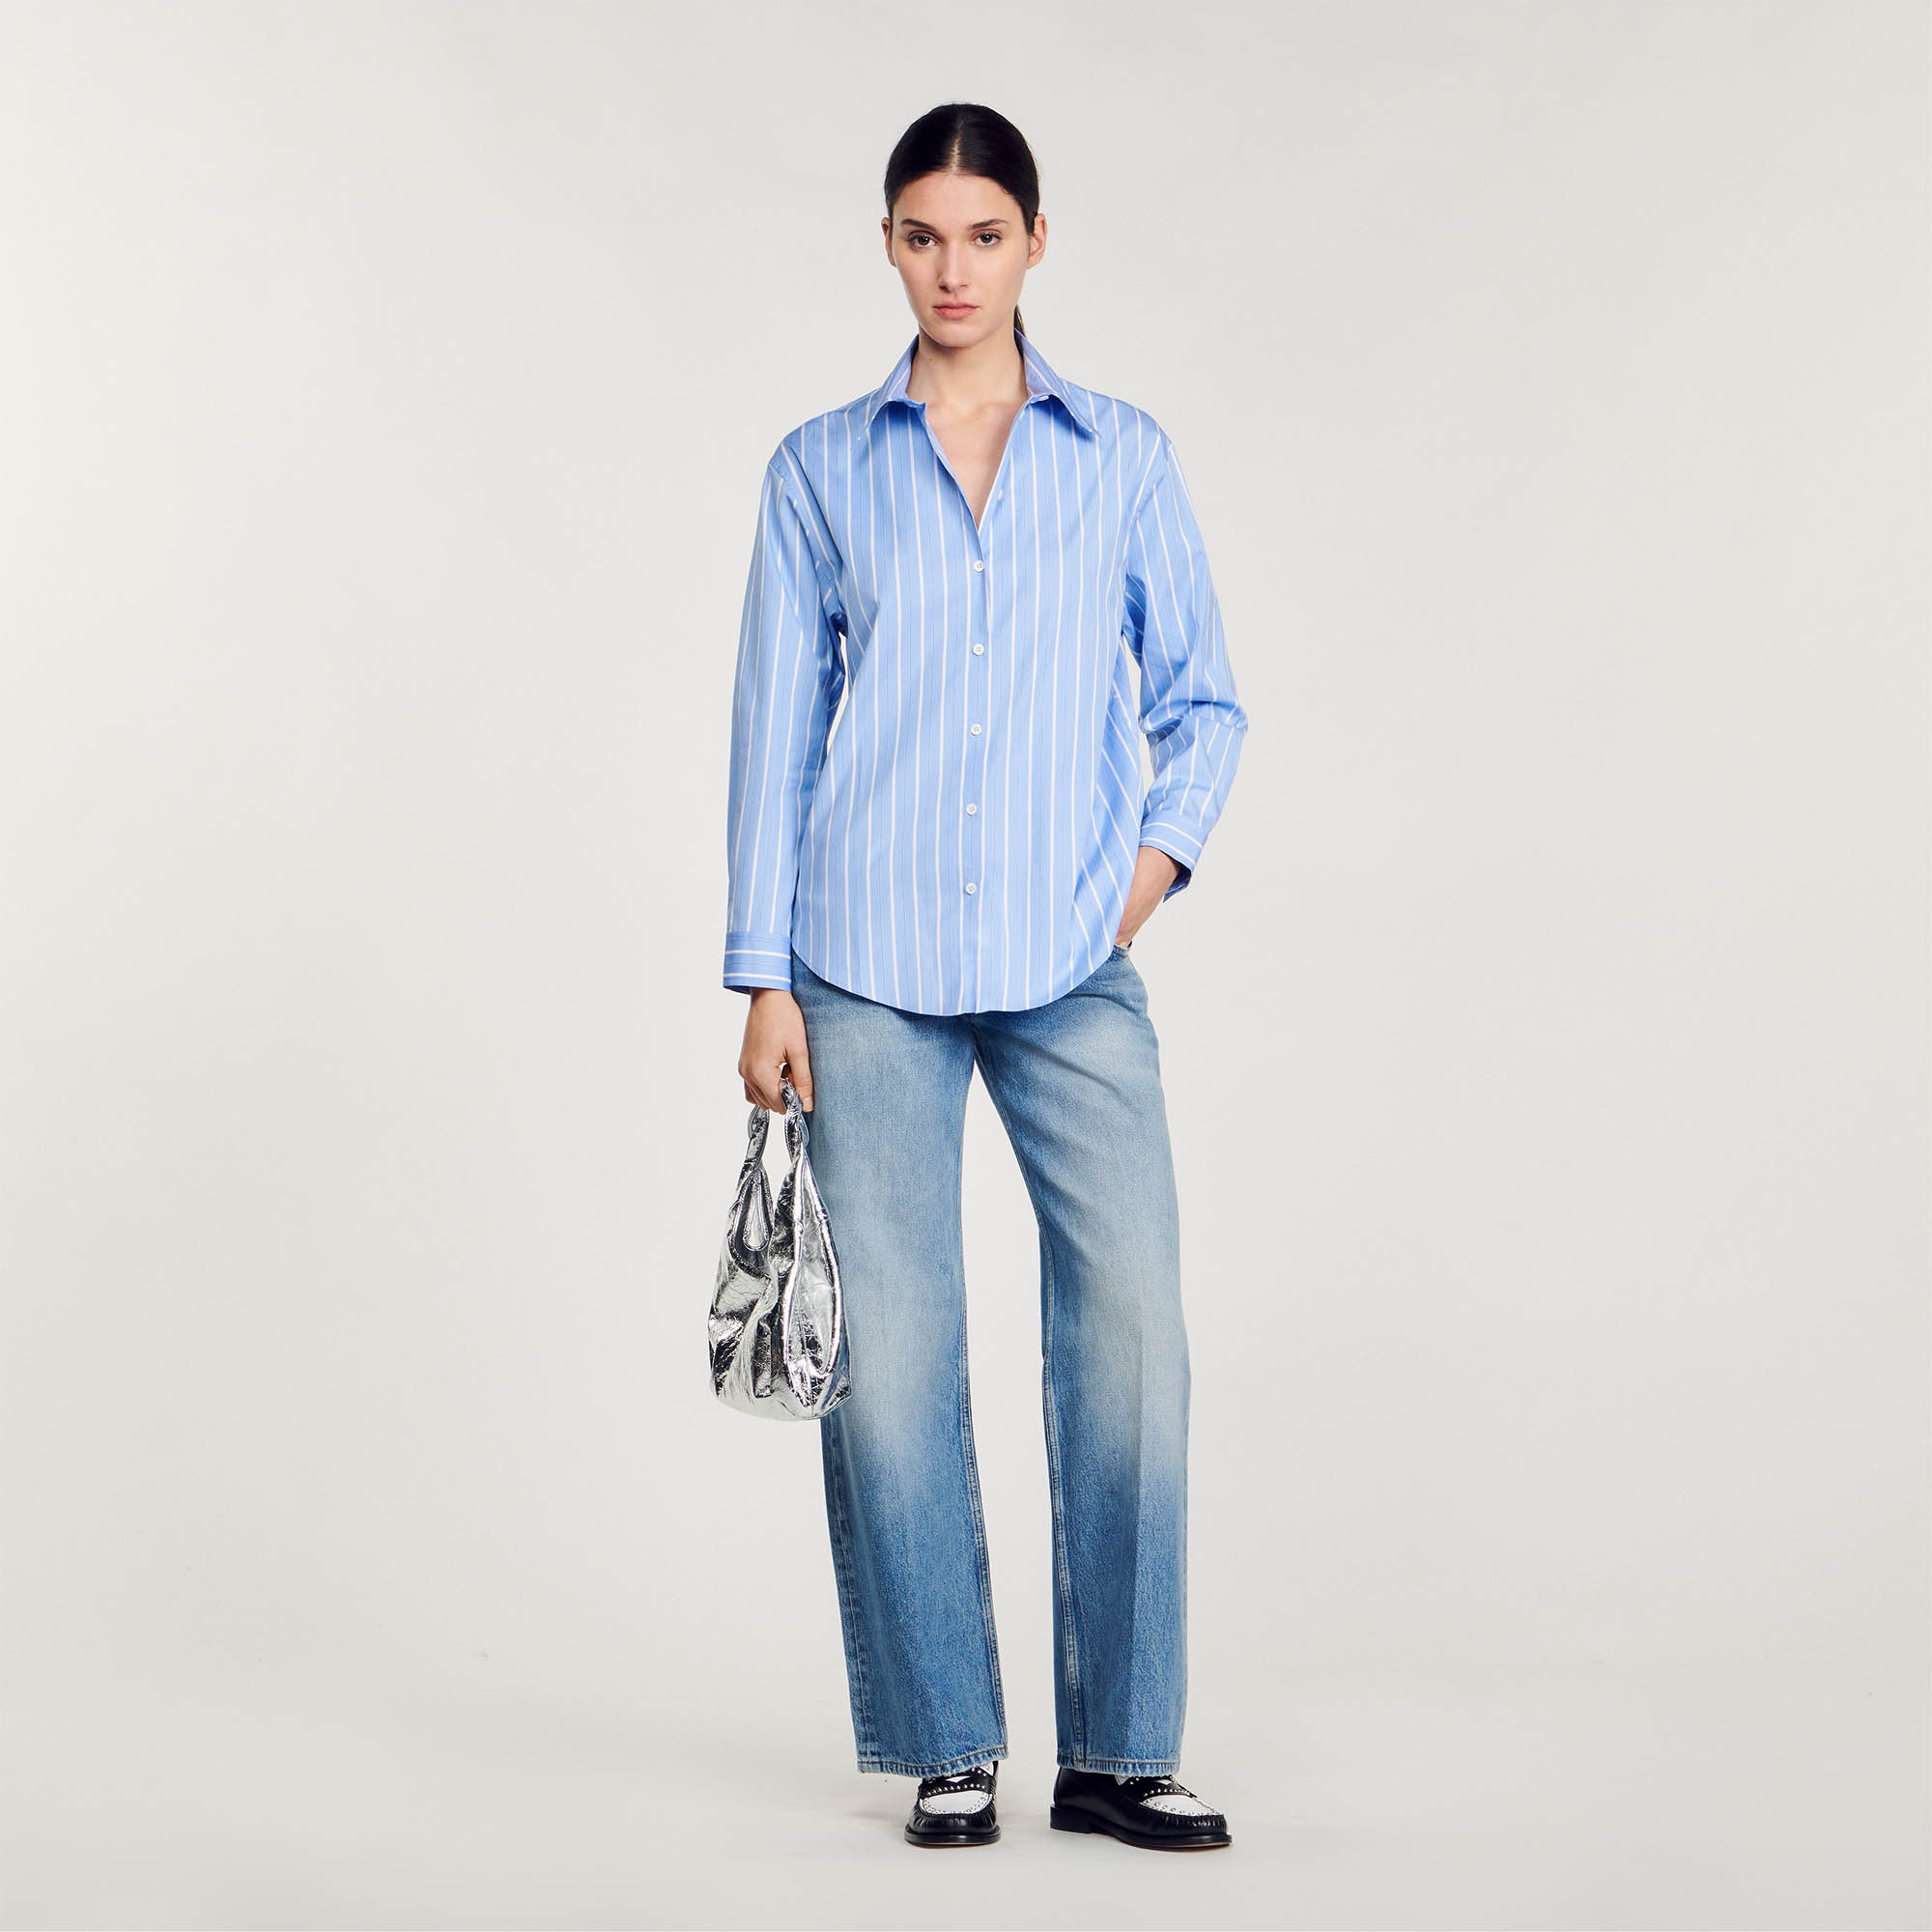 Sandro Stripy shirt with open lace back